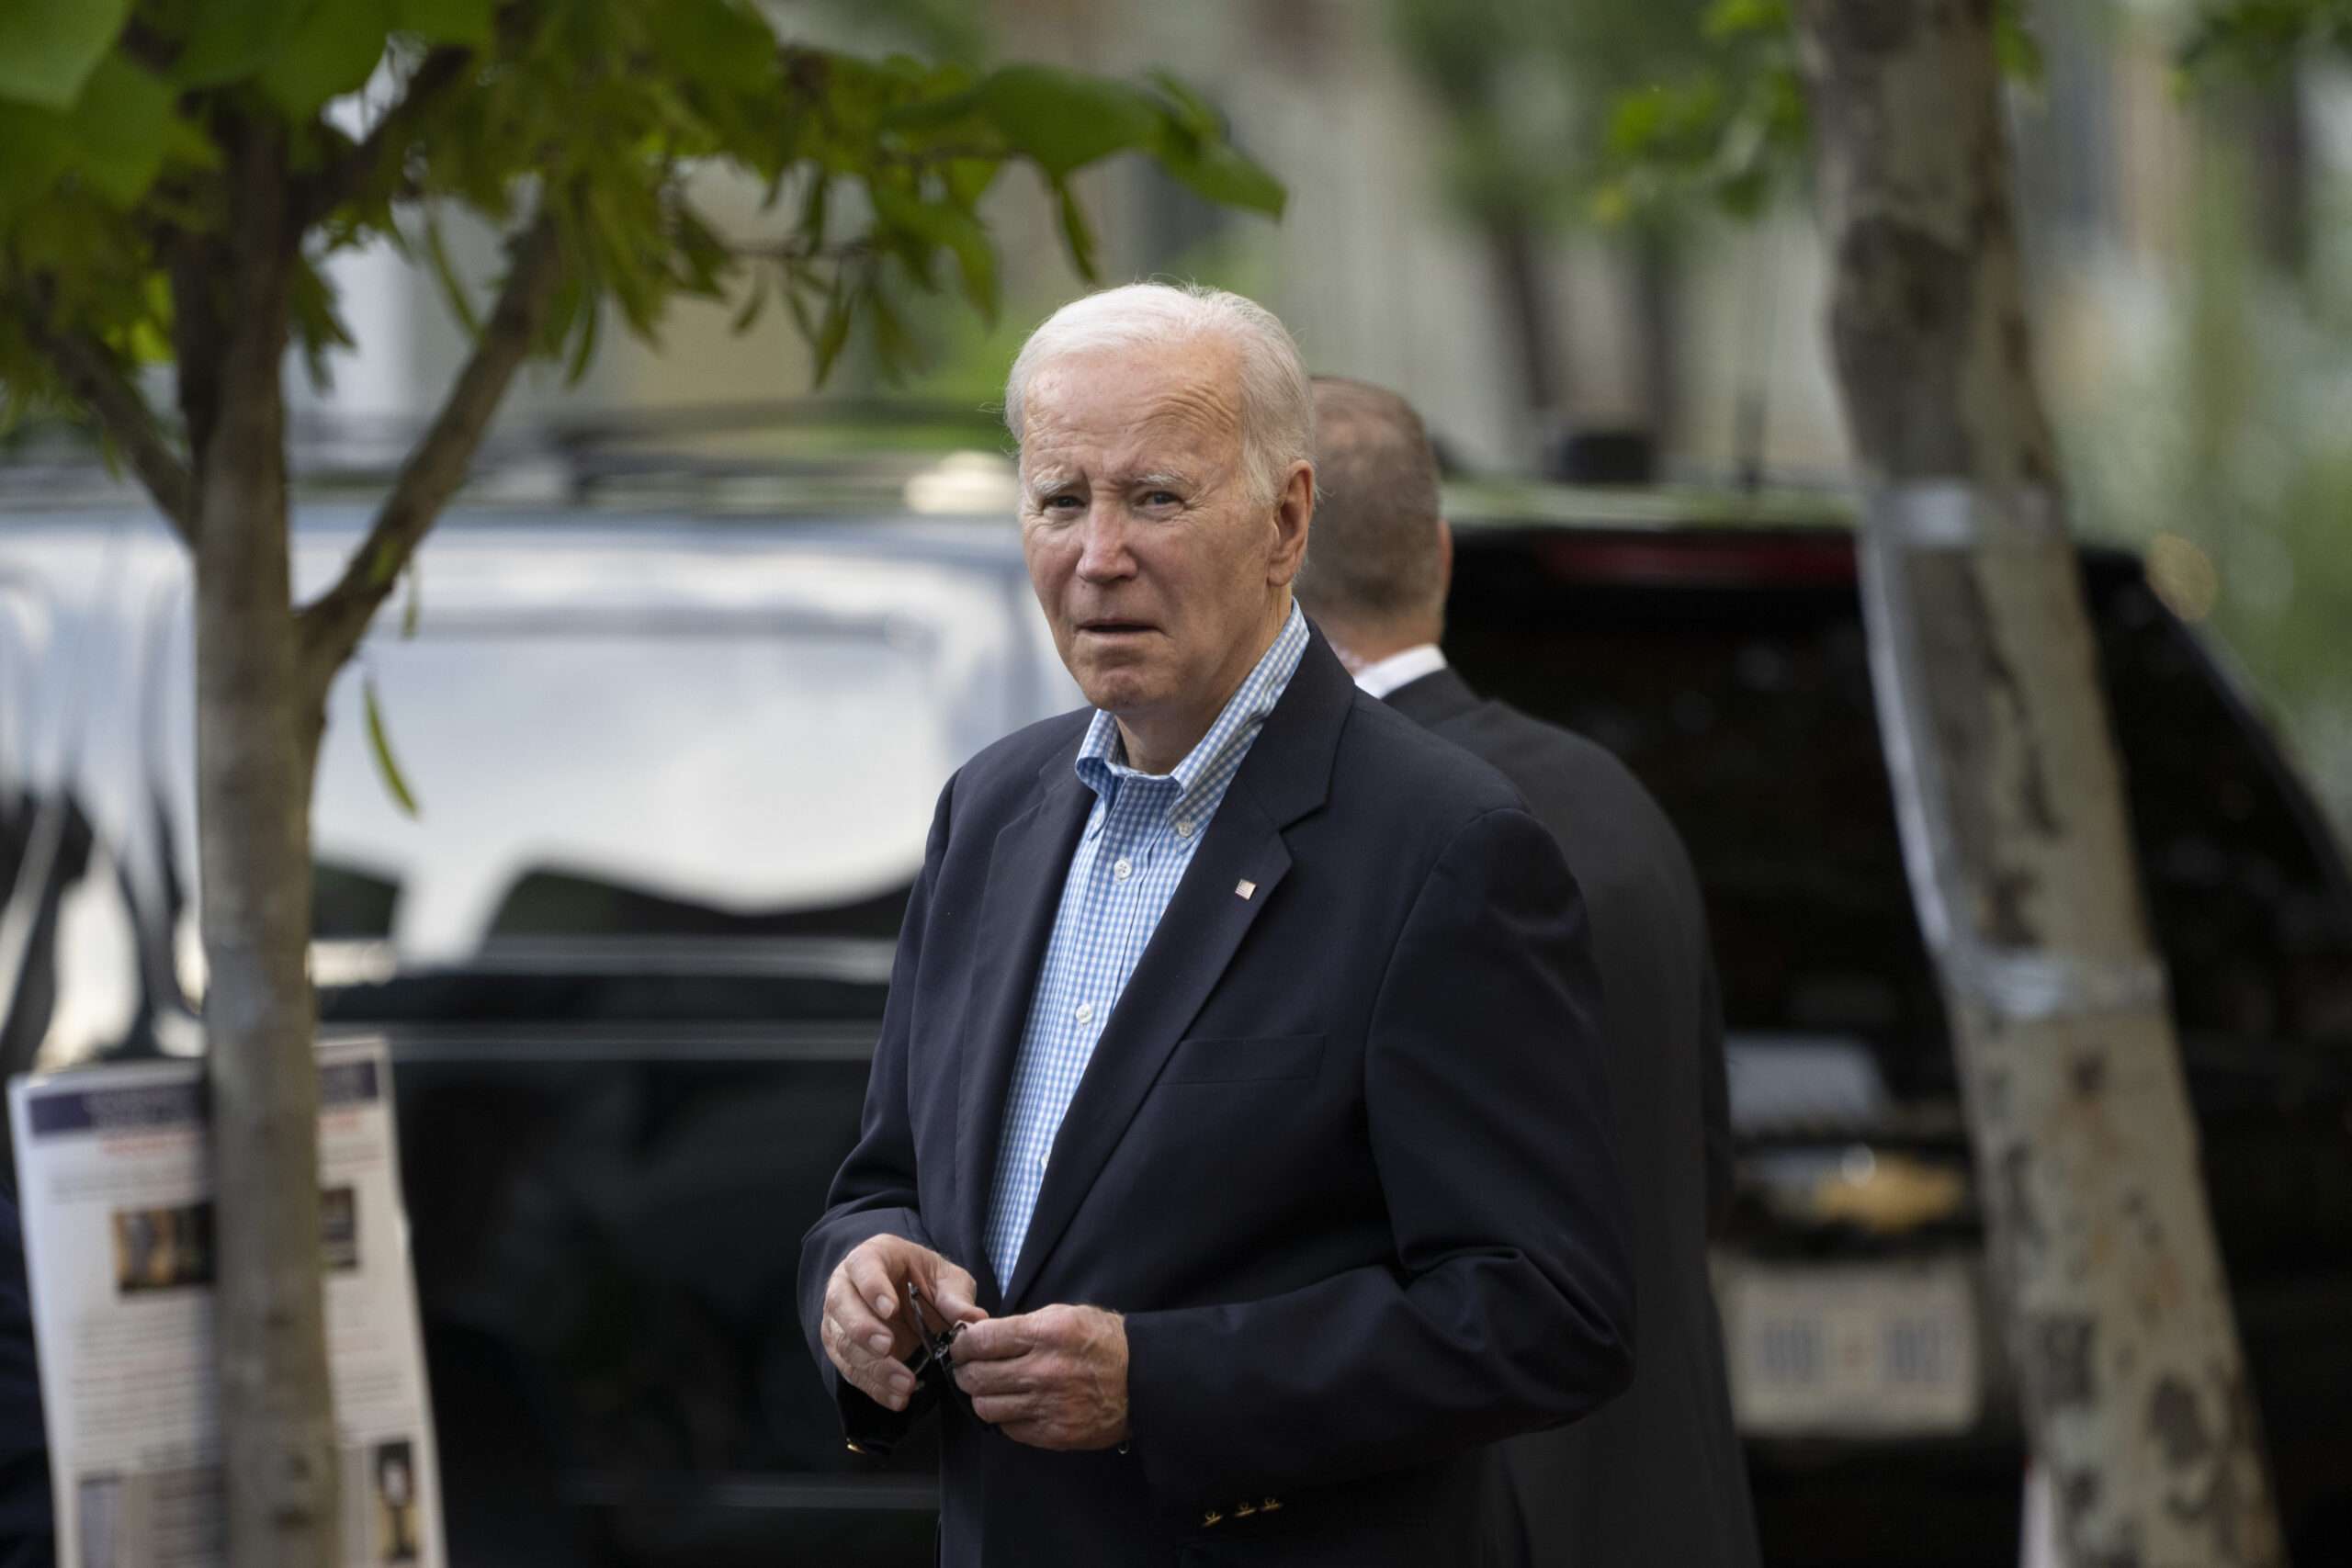 The Biden administration still insists that cannabis consumers have no right to arms